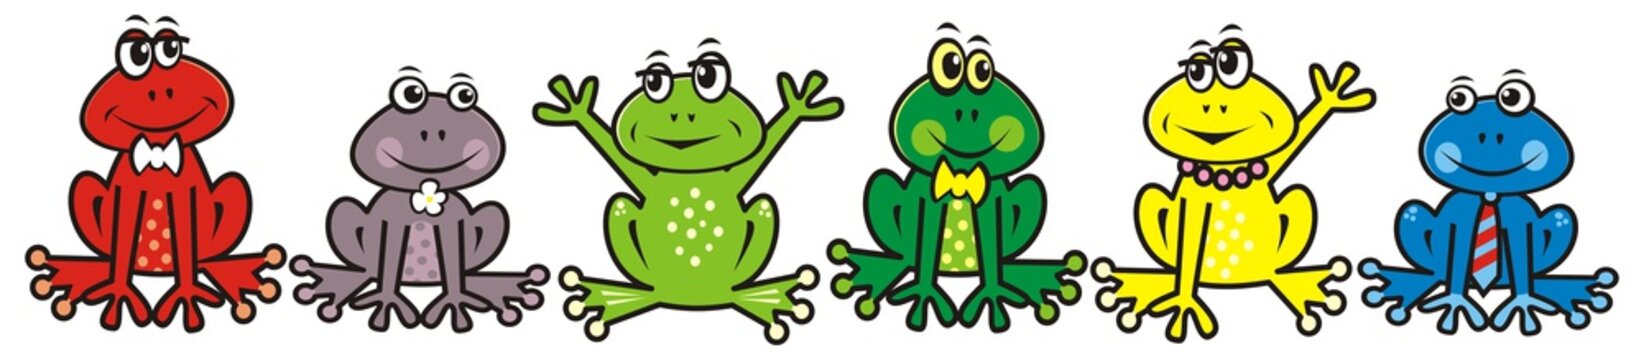 group of frogs, crazy animals, vector illustration